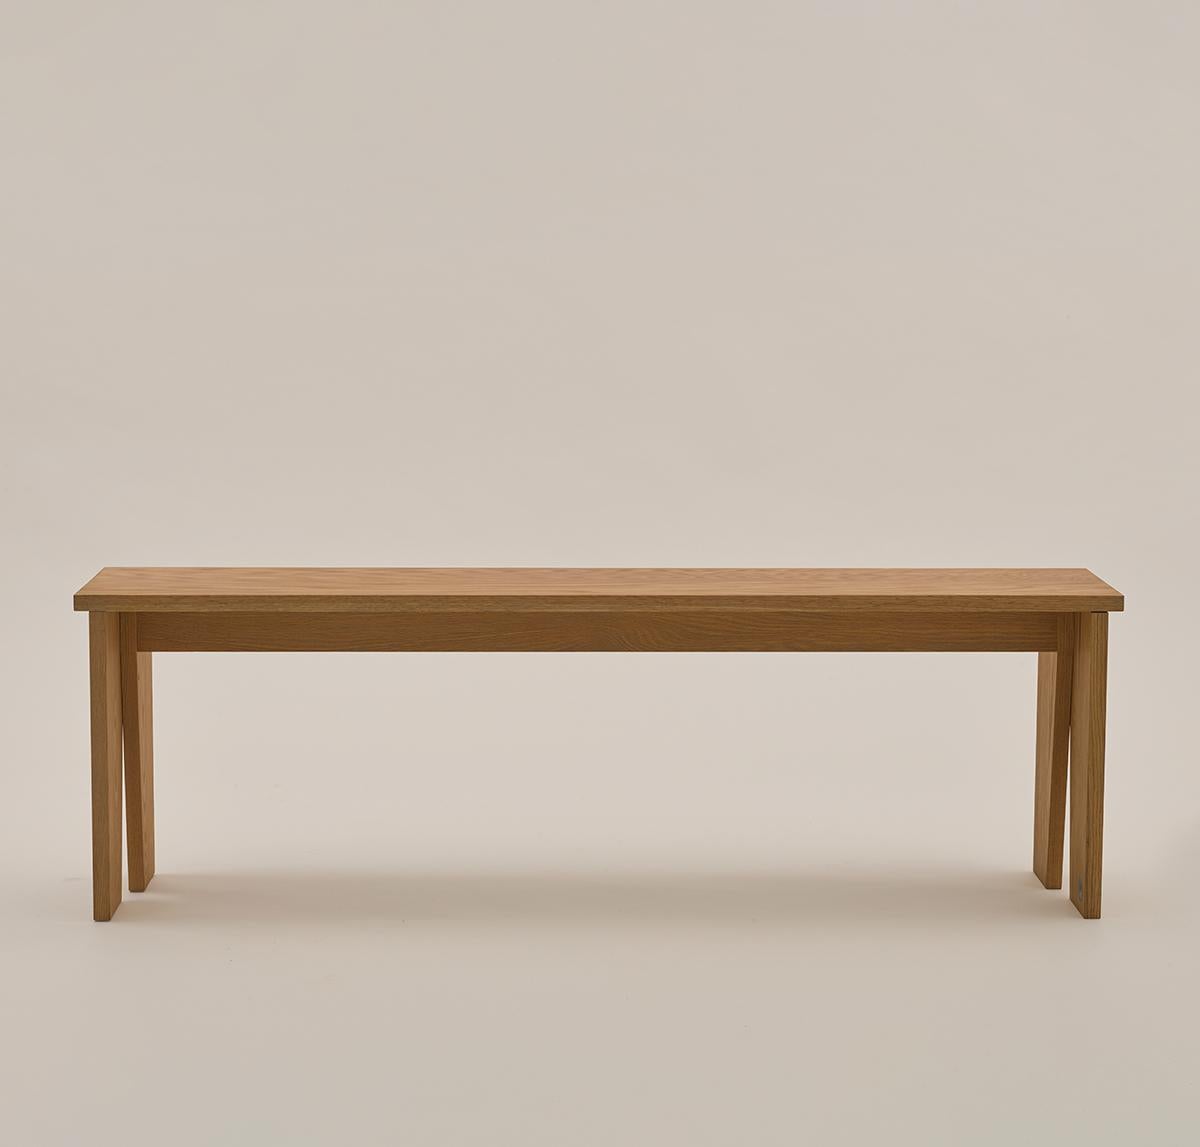 Contoured by a delicate structure, Wa Bench takes its name from the Japanese word “harmony”. It characterizes its presence in the balance of soulful forms and refined details.

Wa Bench is flatpack; the parts join each other easily with screws and